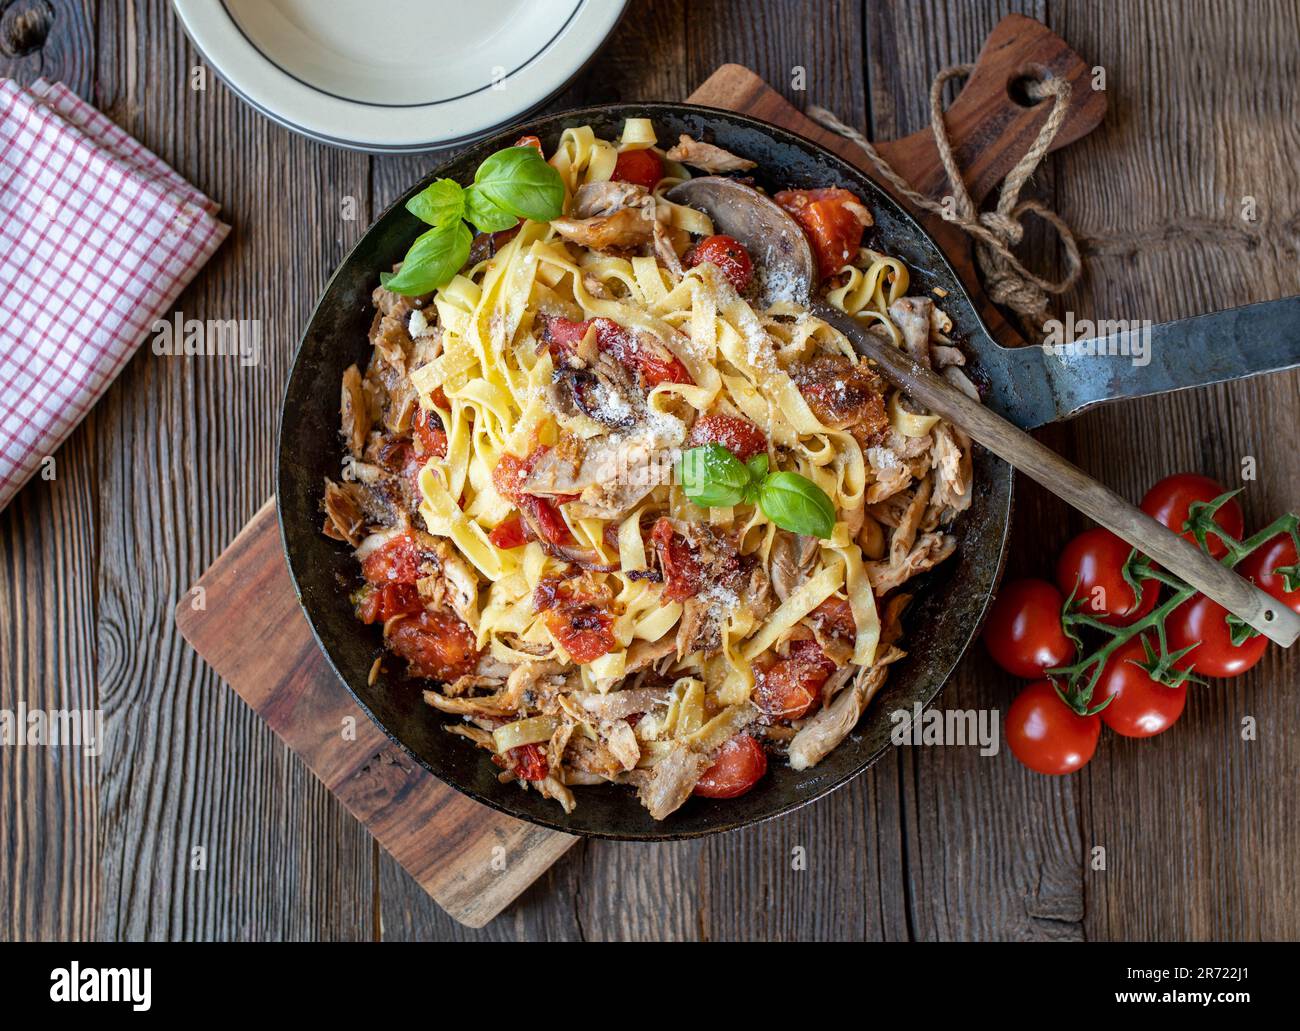 Pasta with roasted chicken meat, tomatoes, onions, garlic and herbs in a pan on wooden table Stock Photo